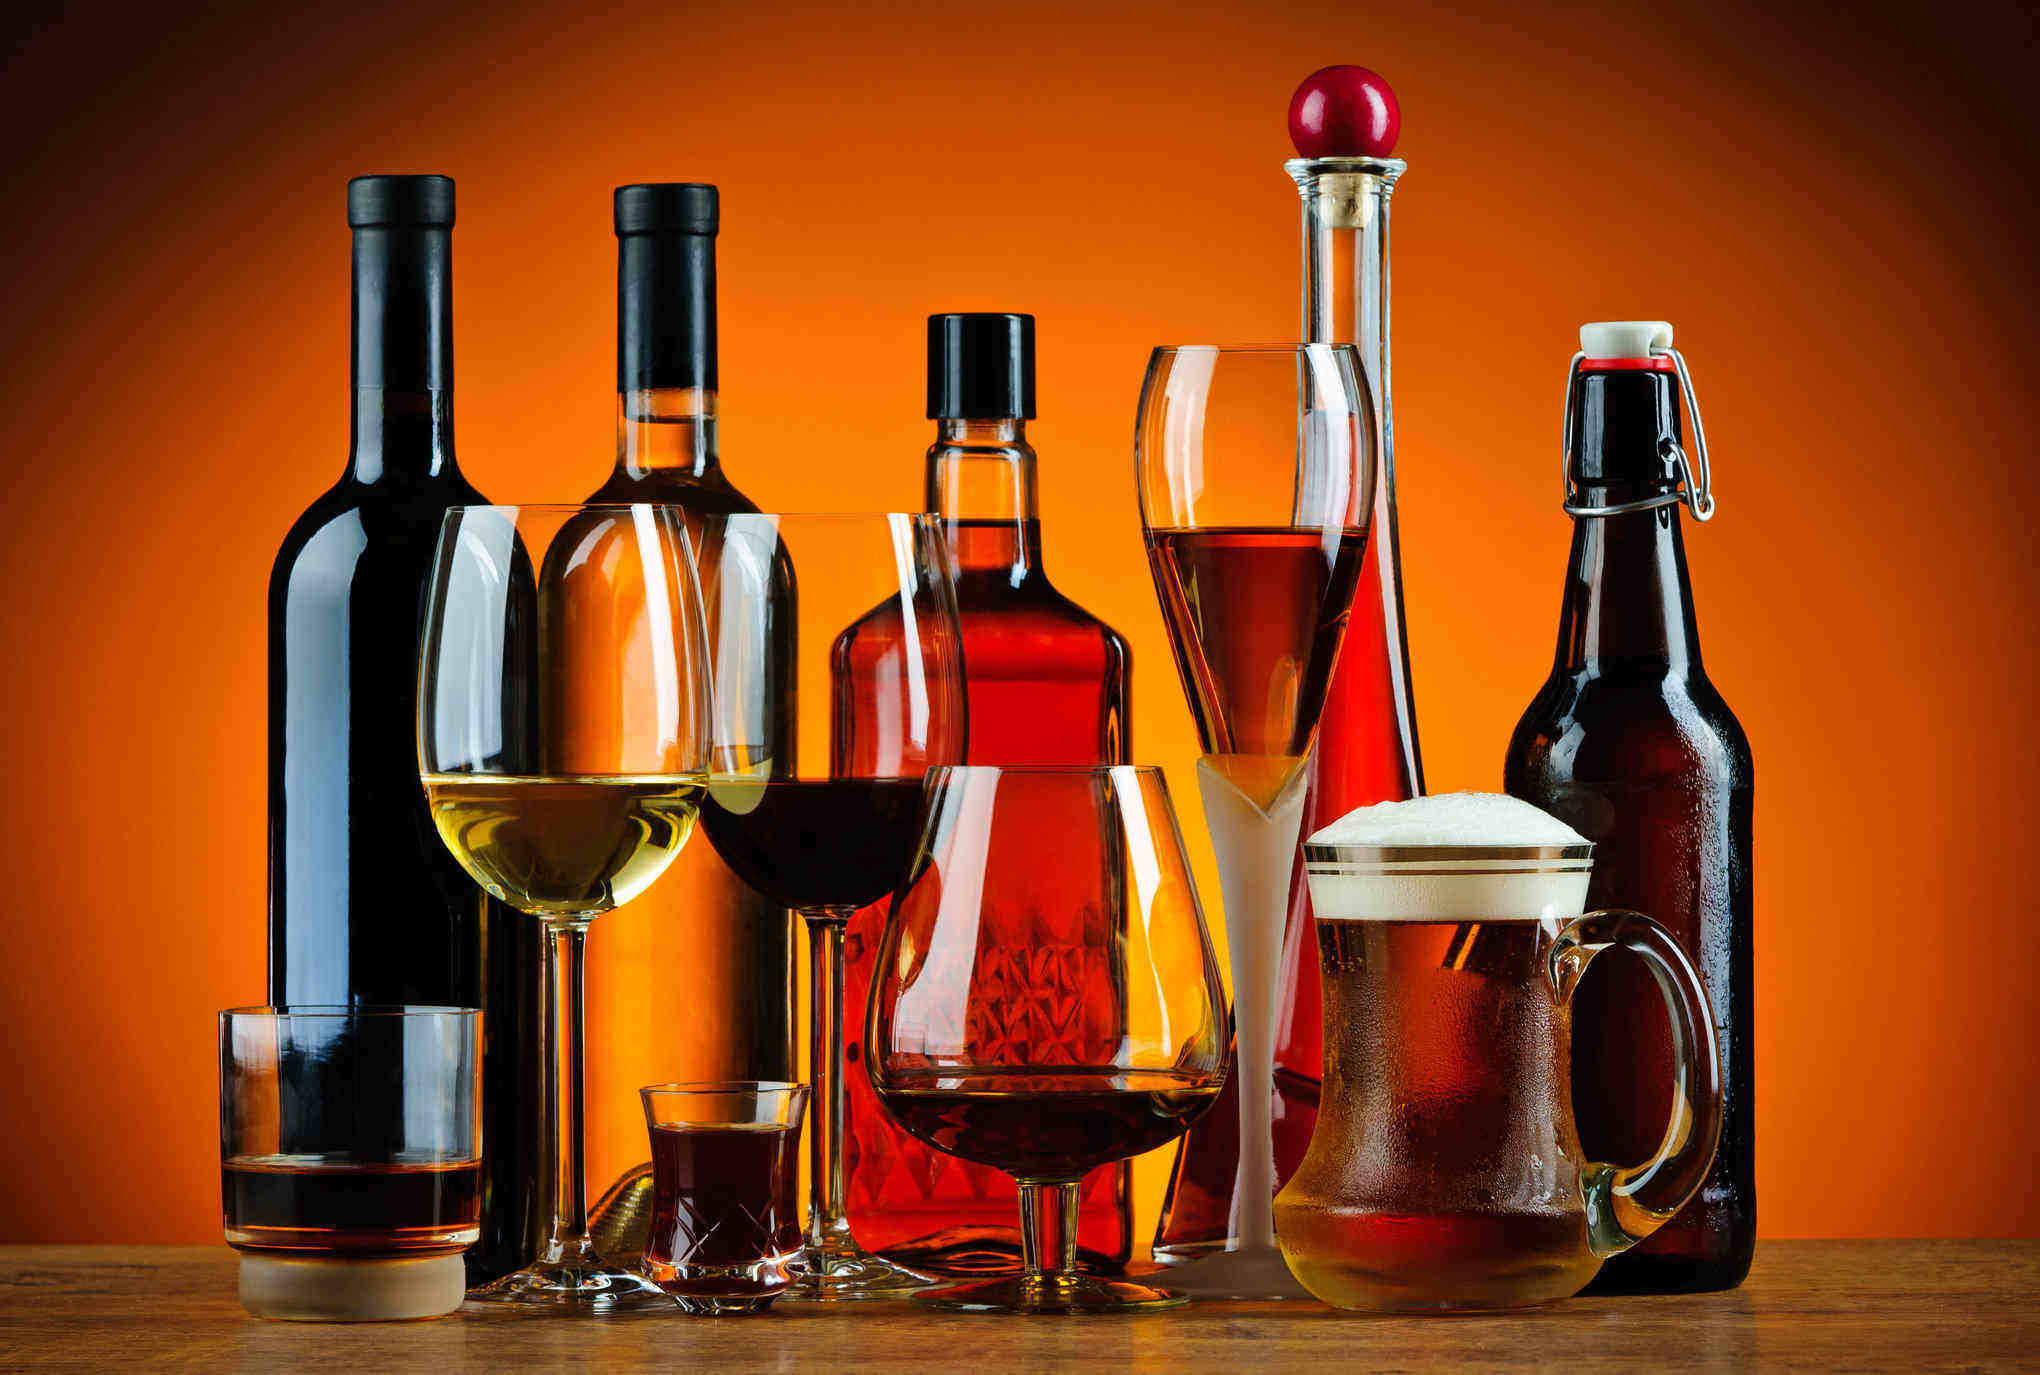 The Alcohol Beverage Federation of Ireland has welcomed new figures from the Revenue Commissioners indicating that alcohol consumption in Ireland fell in 2017.